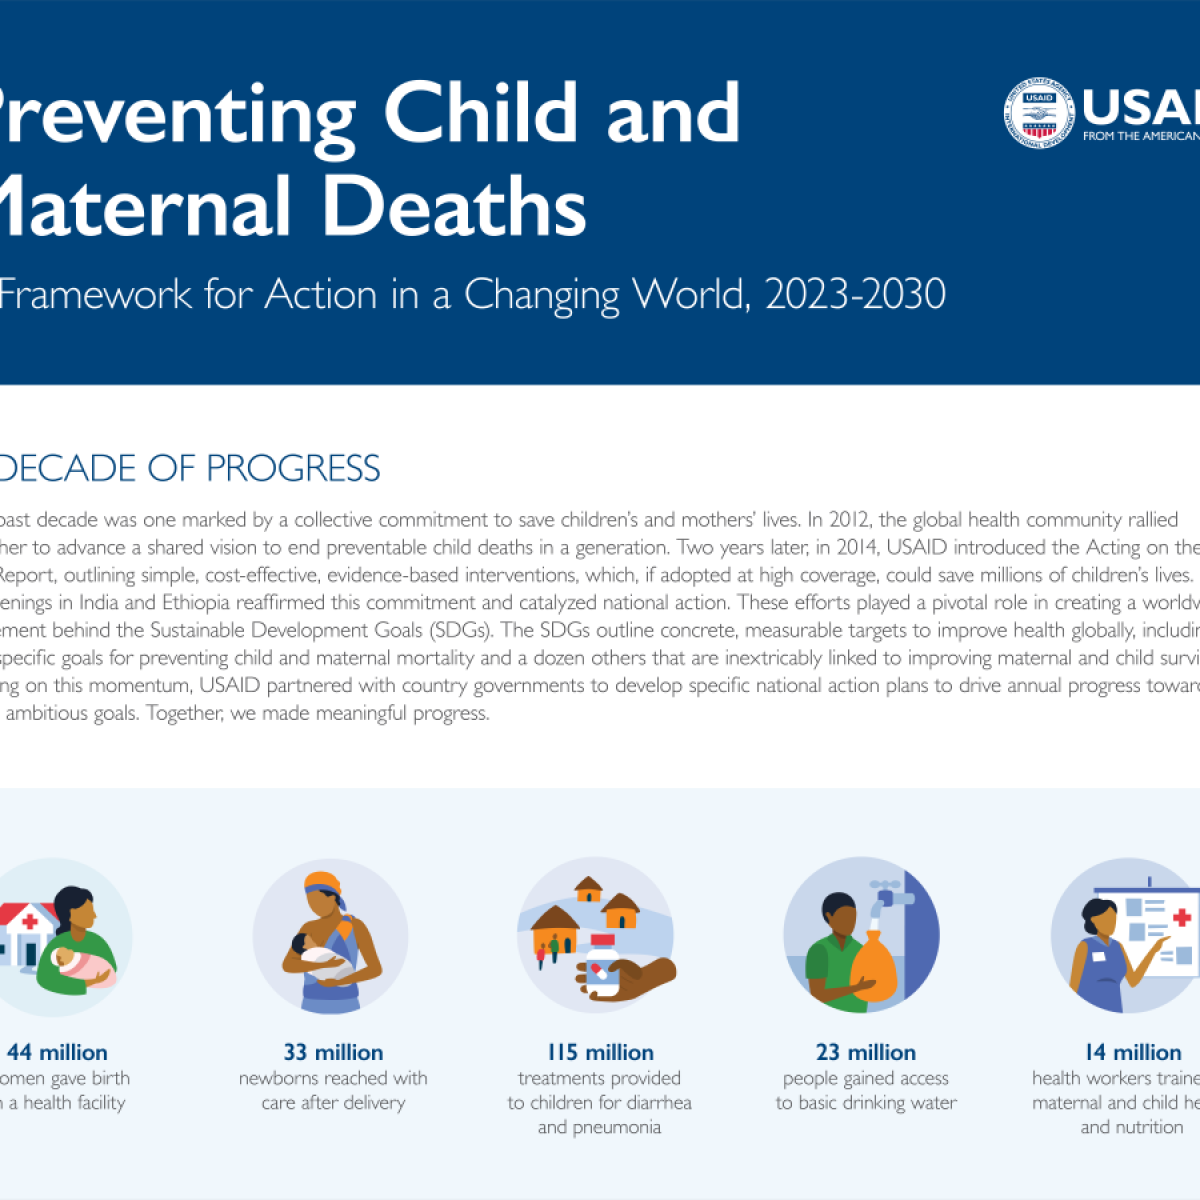 Preventing Child and Maternal Deaths: A Framework for Action in a Changing World 2023-2030 Fact Sheet